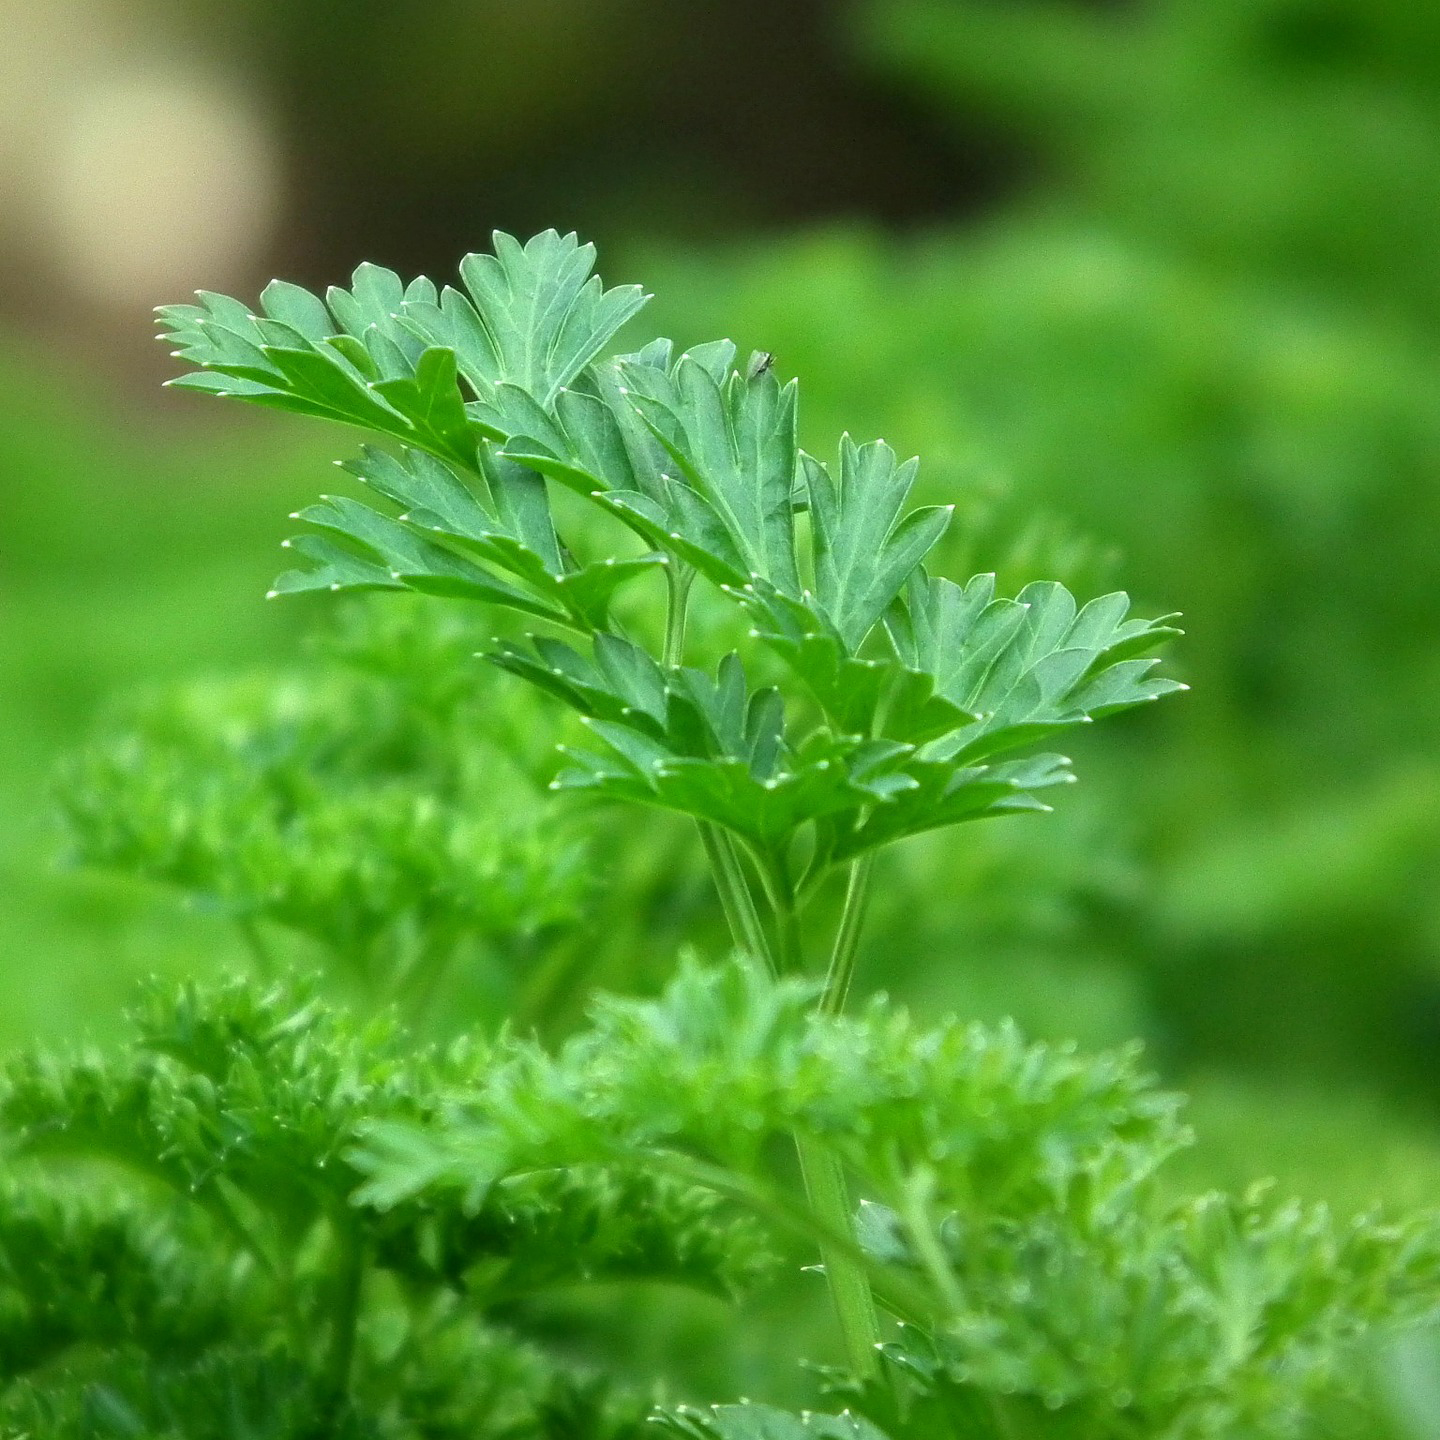 parsley | Health Topics | NutritionFacts.org